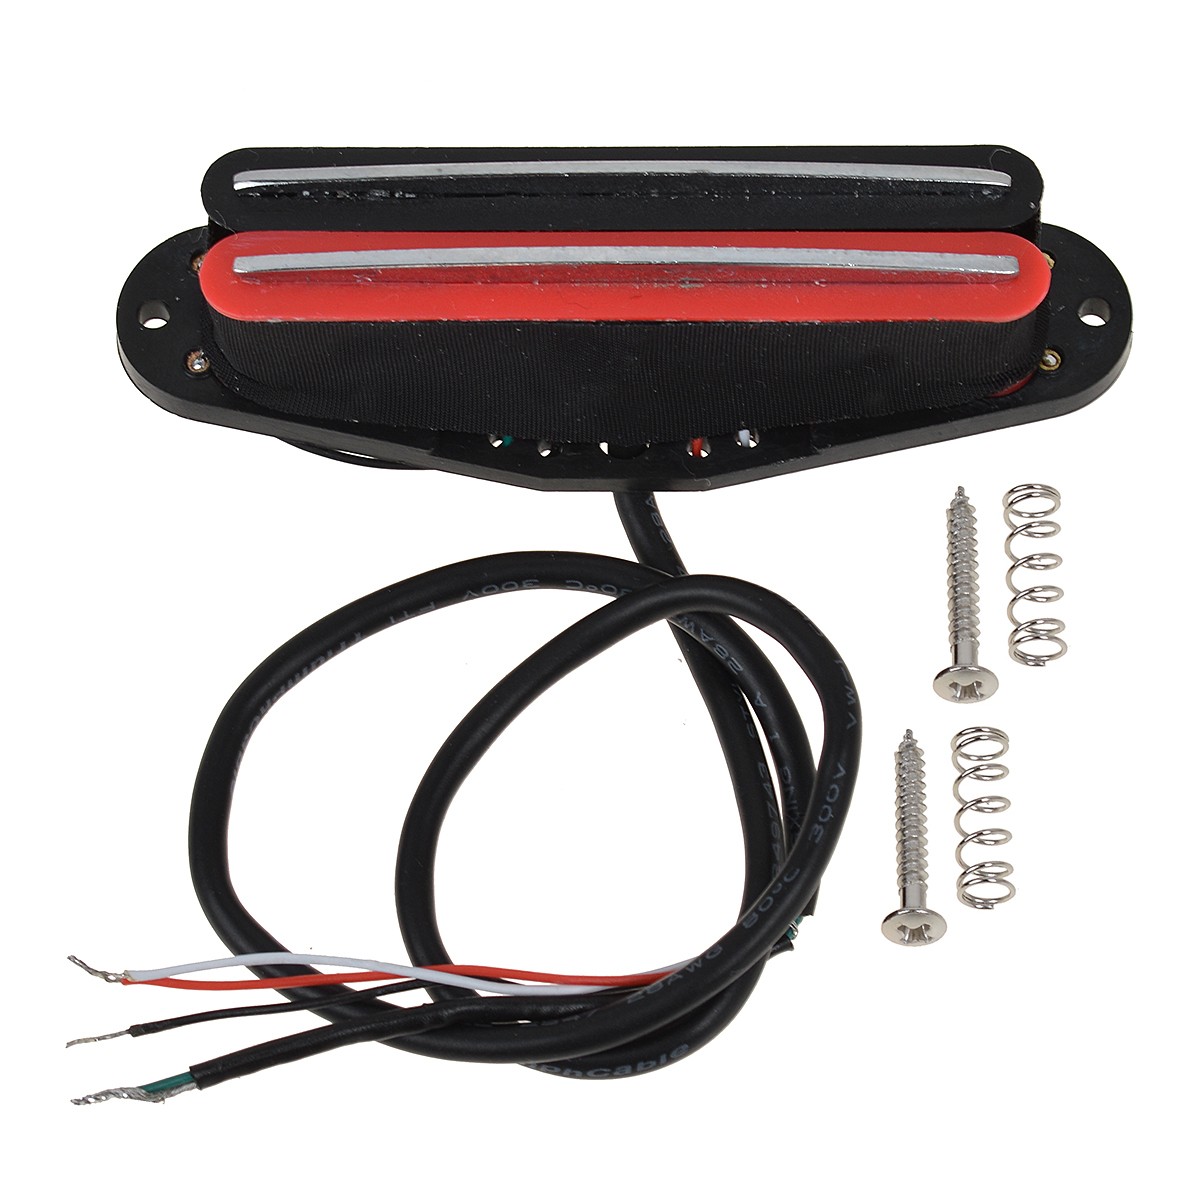 Hot Rail Pickup Humbucker Double Coil Pickups Electric Guitar Parts Accessories Black White Red Zebra in Guitar Parts & Accessories from Sports